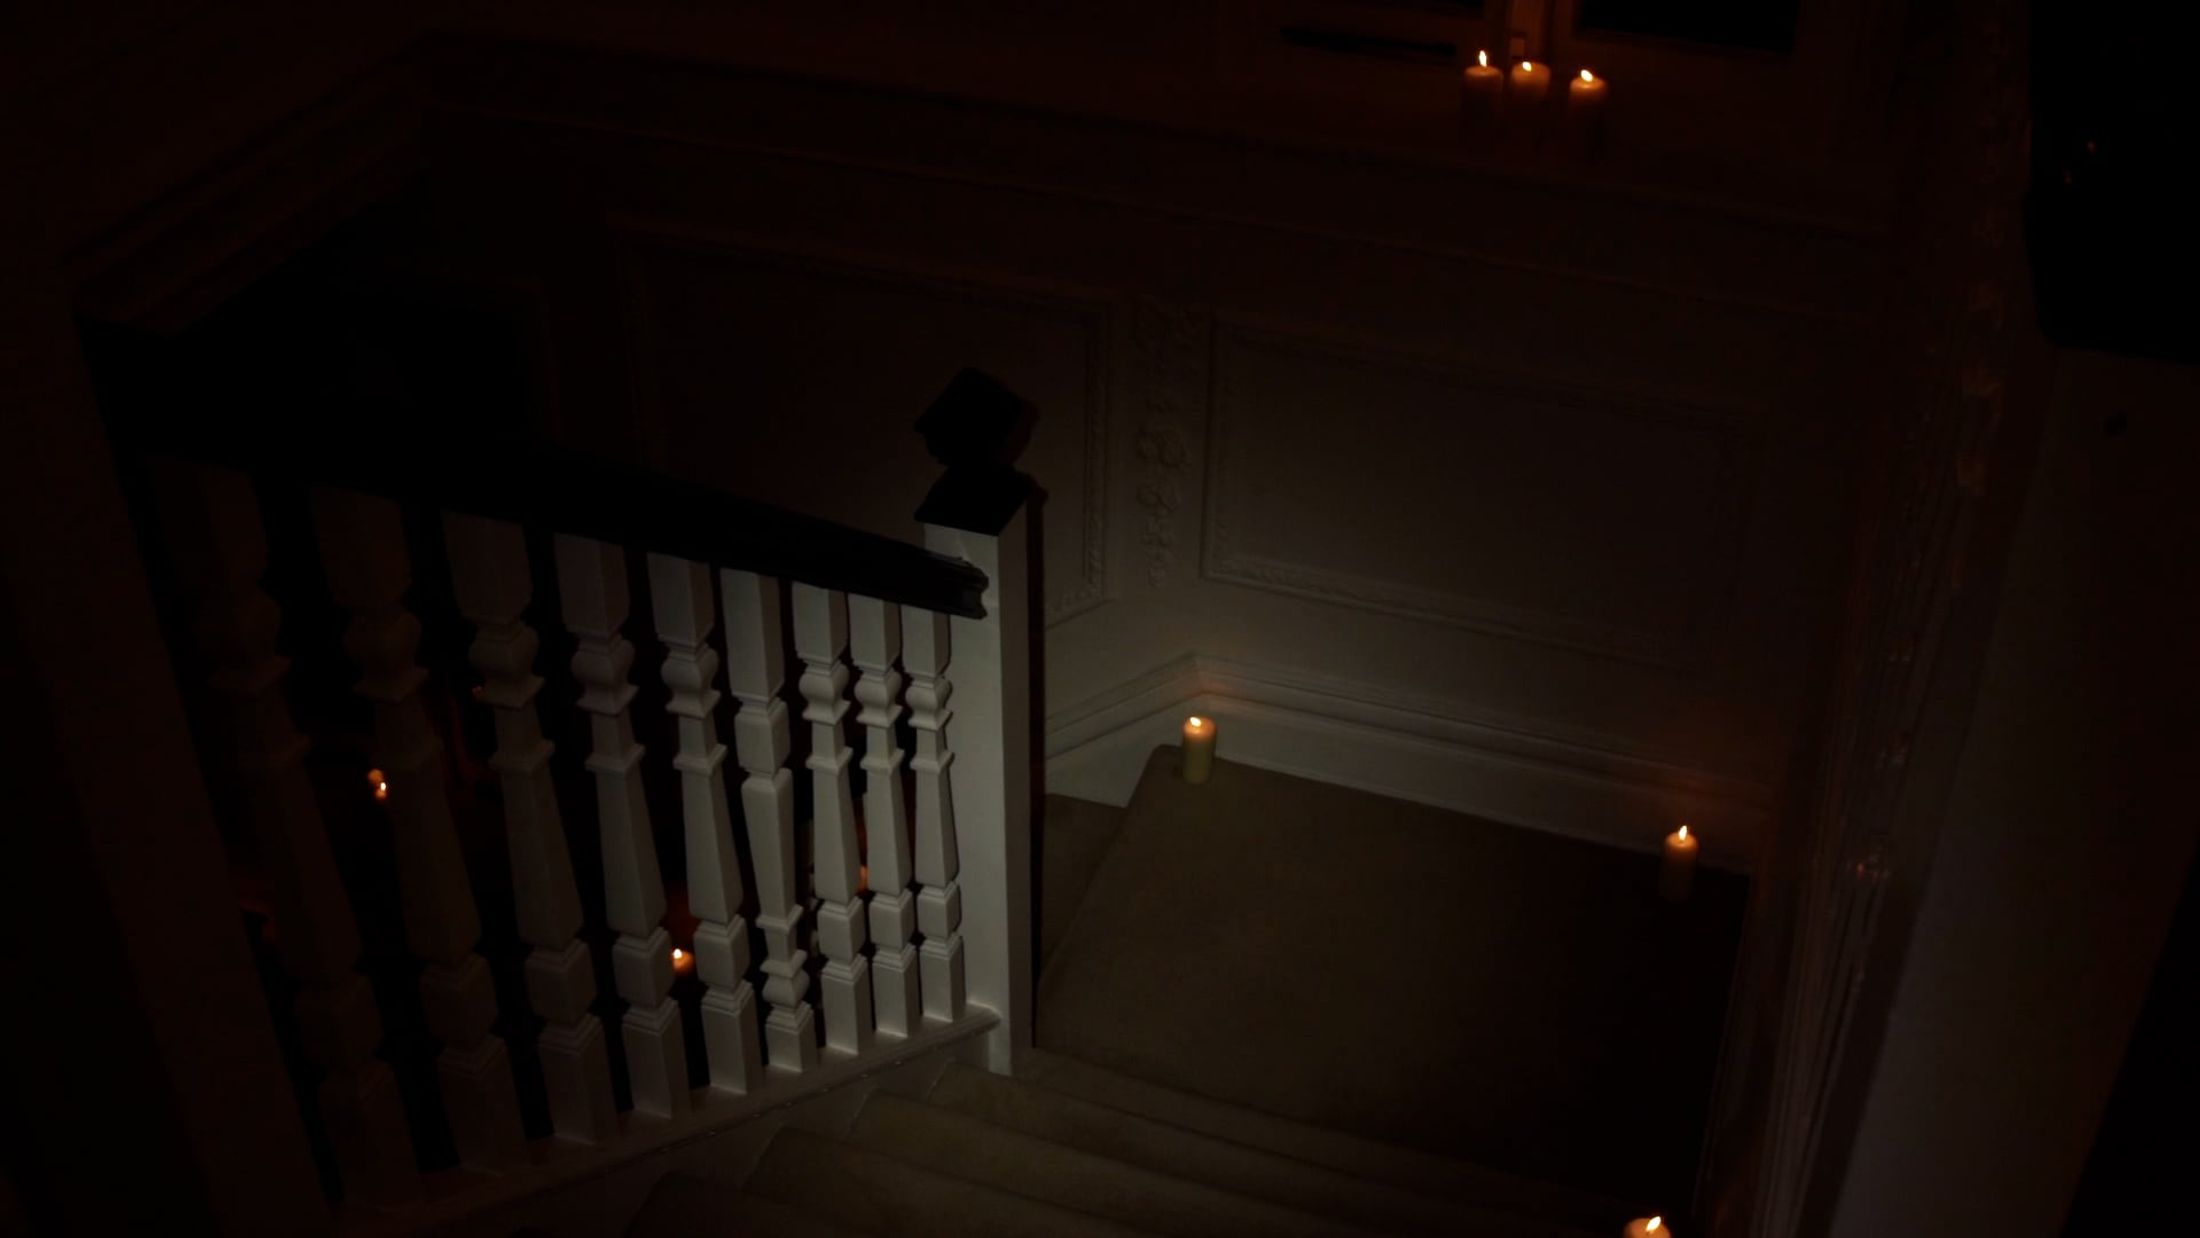 Still from Alison (2021) by Melle Nieling, descending a dark staircase